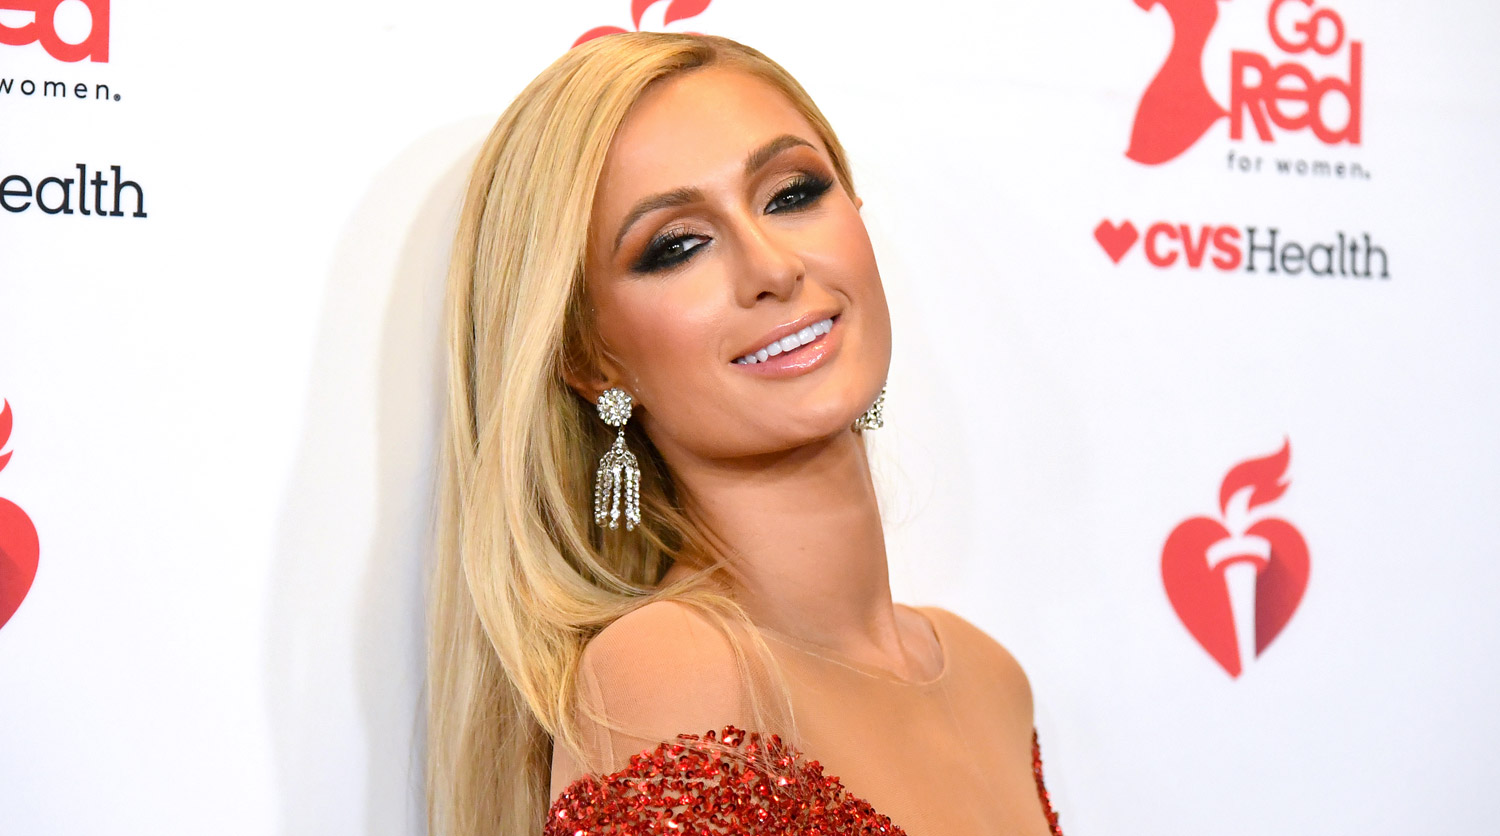 Paris Hilton Will Be Streaming a Live DJ Set for Charity!